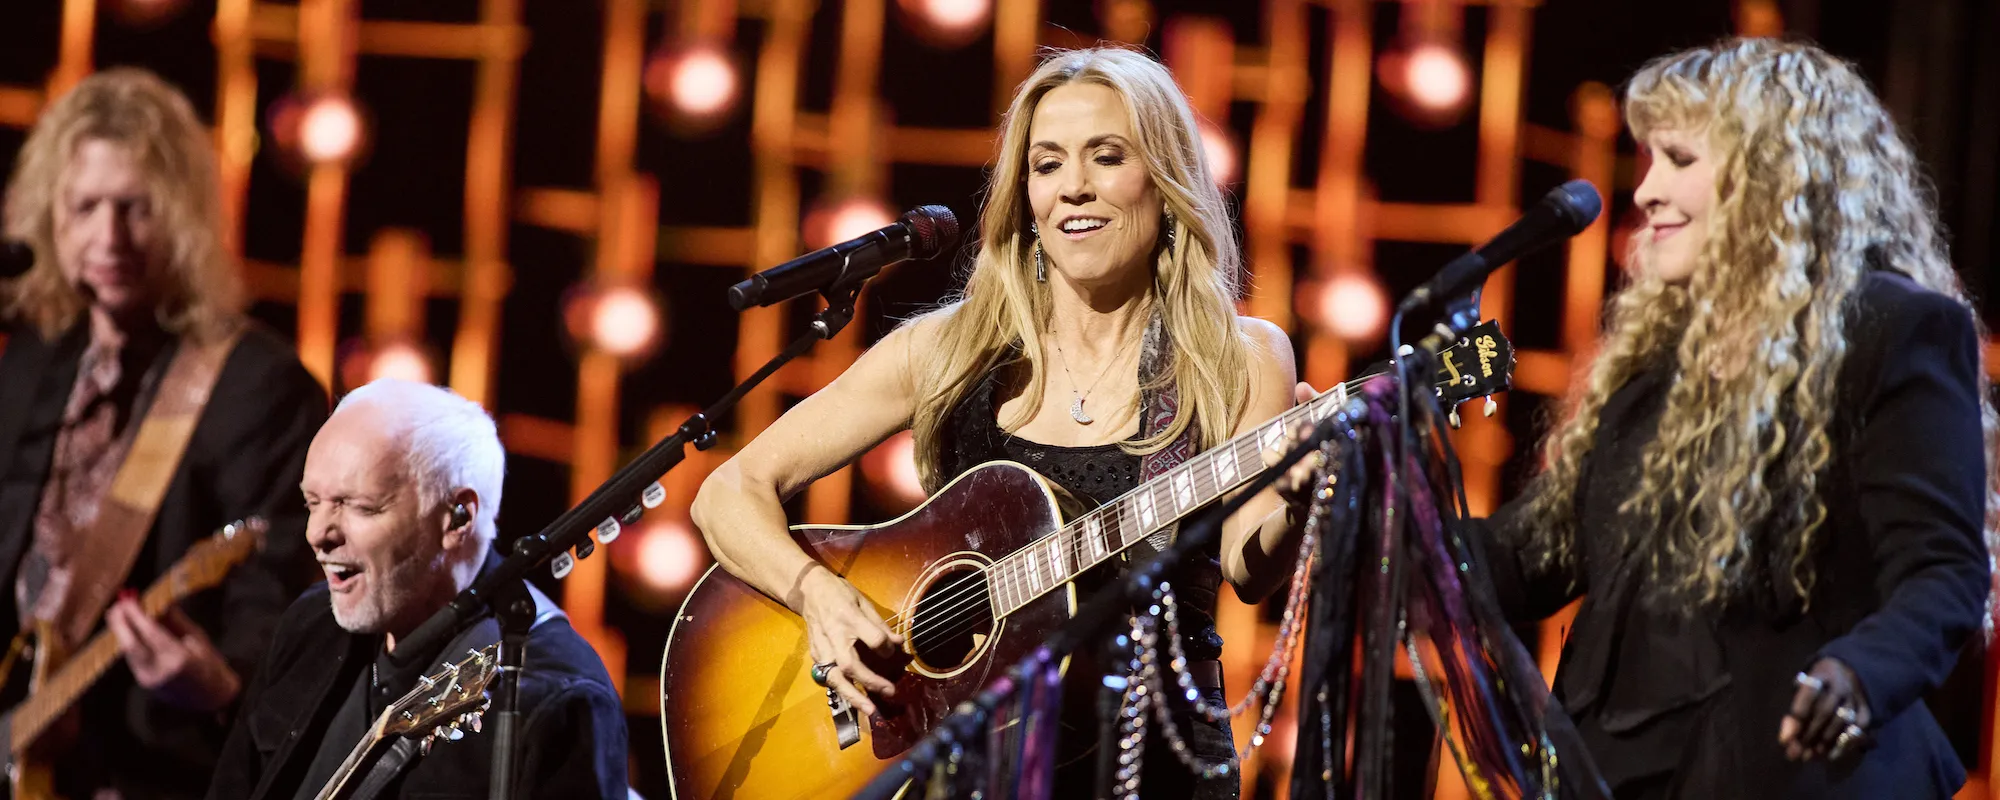 Sheryl Crow Quotes Jimmy Buffett, Joined by Stevie Nicks, Peter Frampton, Olivia Rodrigo During Rock & Roll Hall of Fame Induction